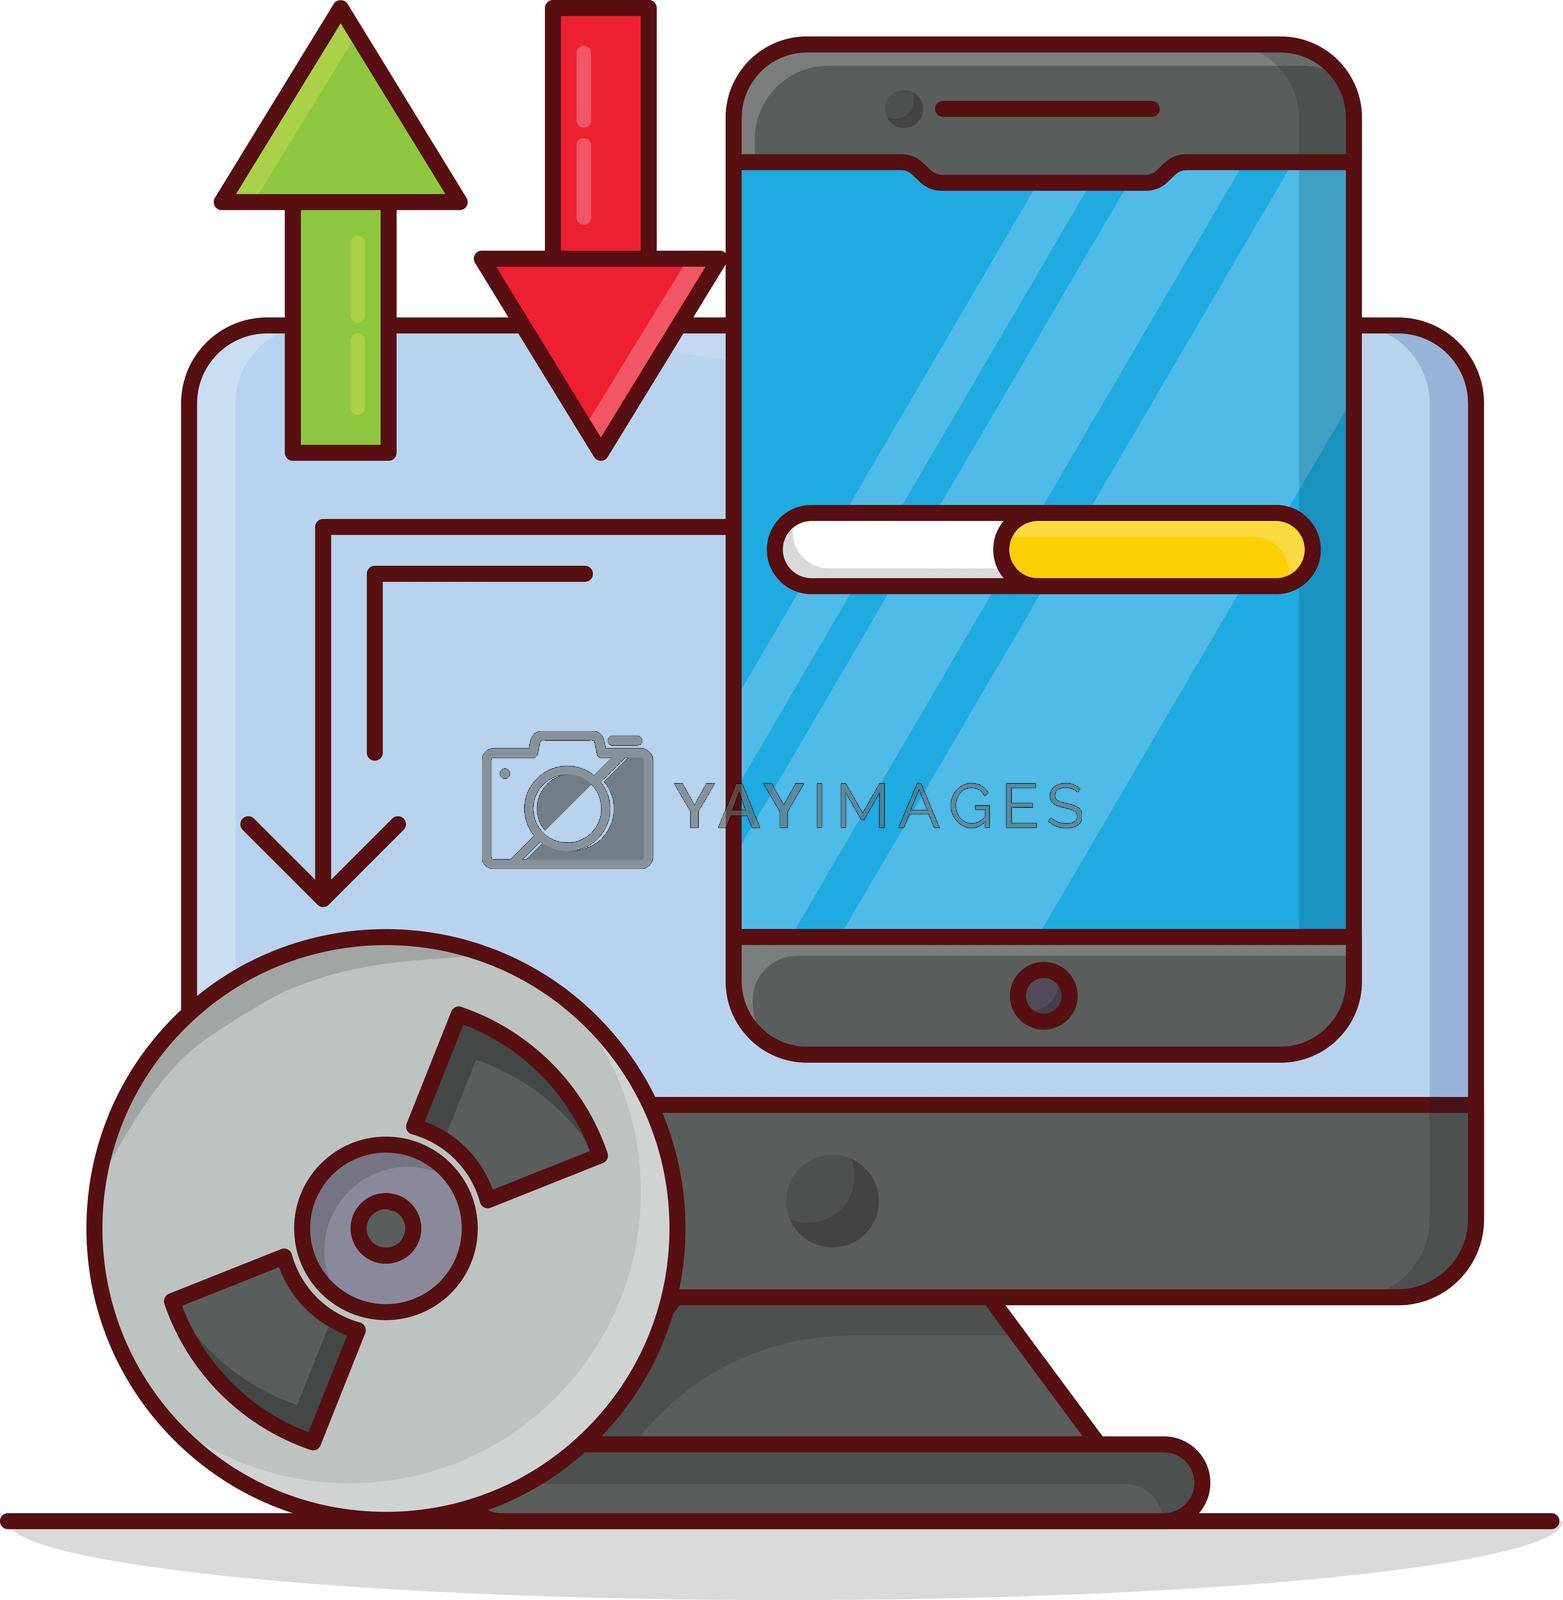 Royalty free image of technology by FlaticonsDesign